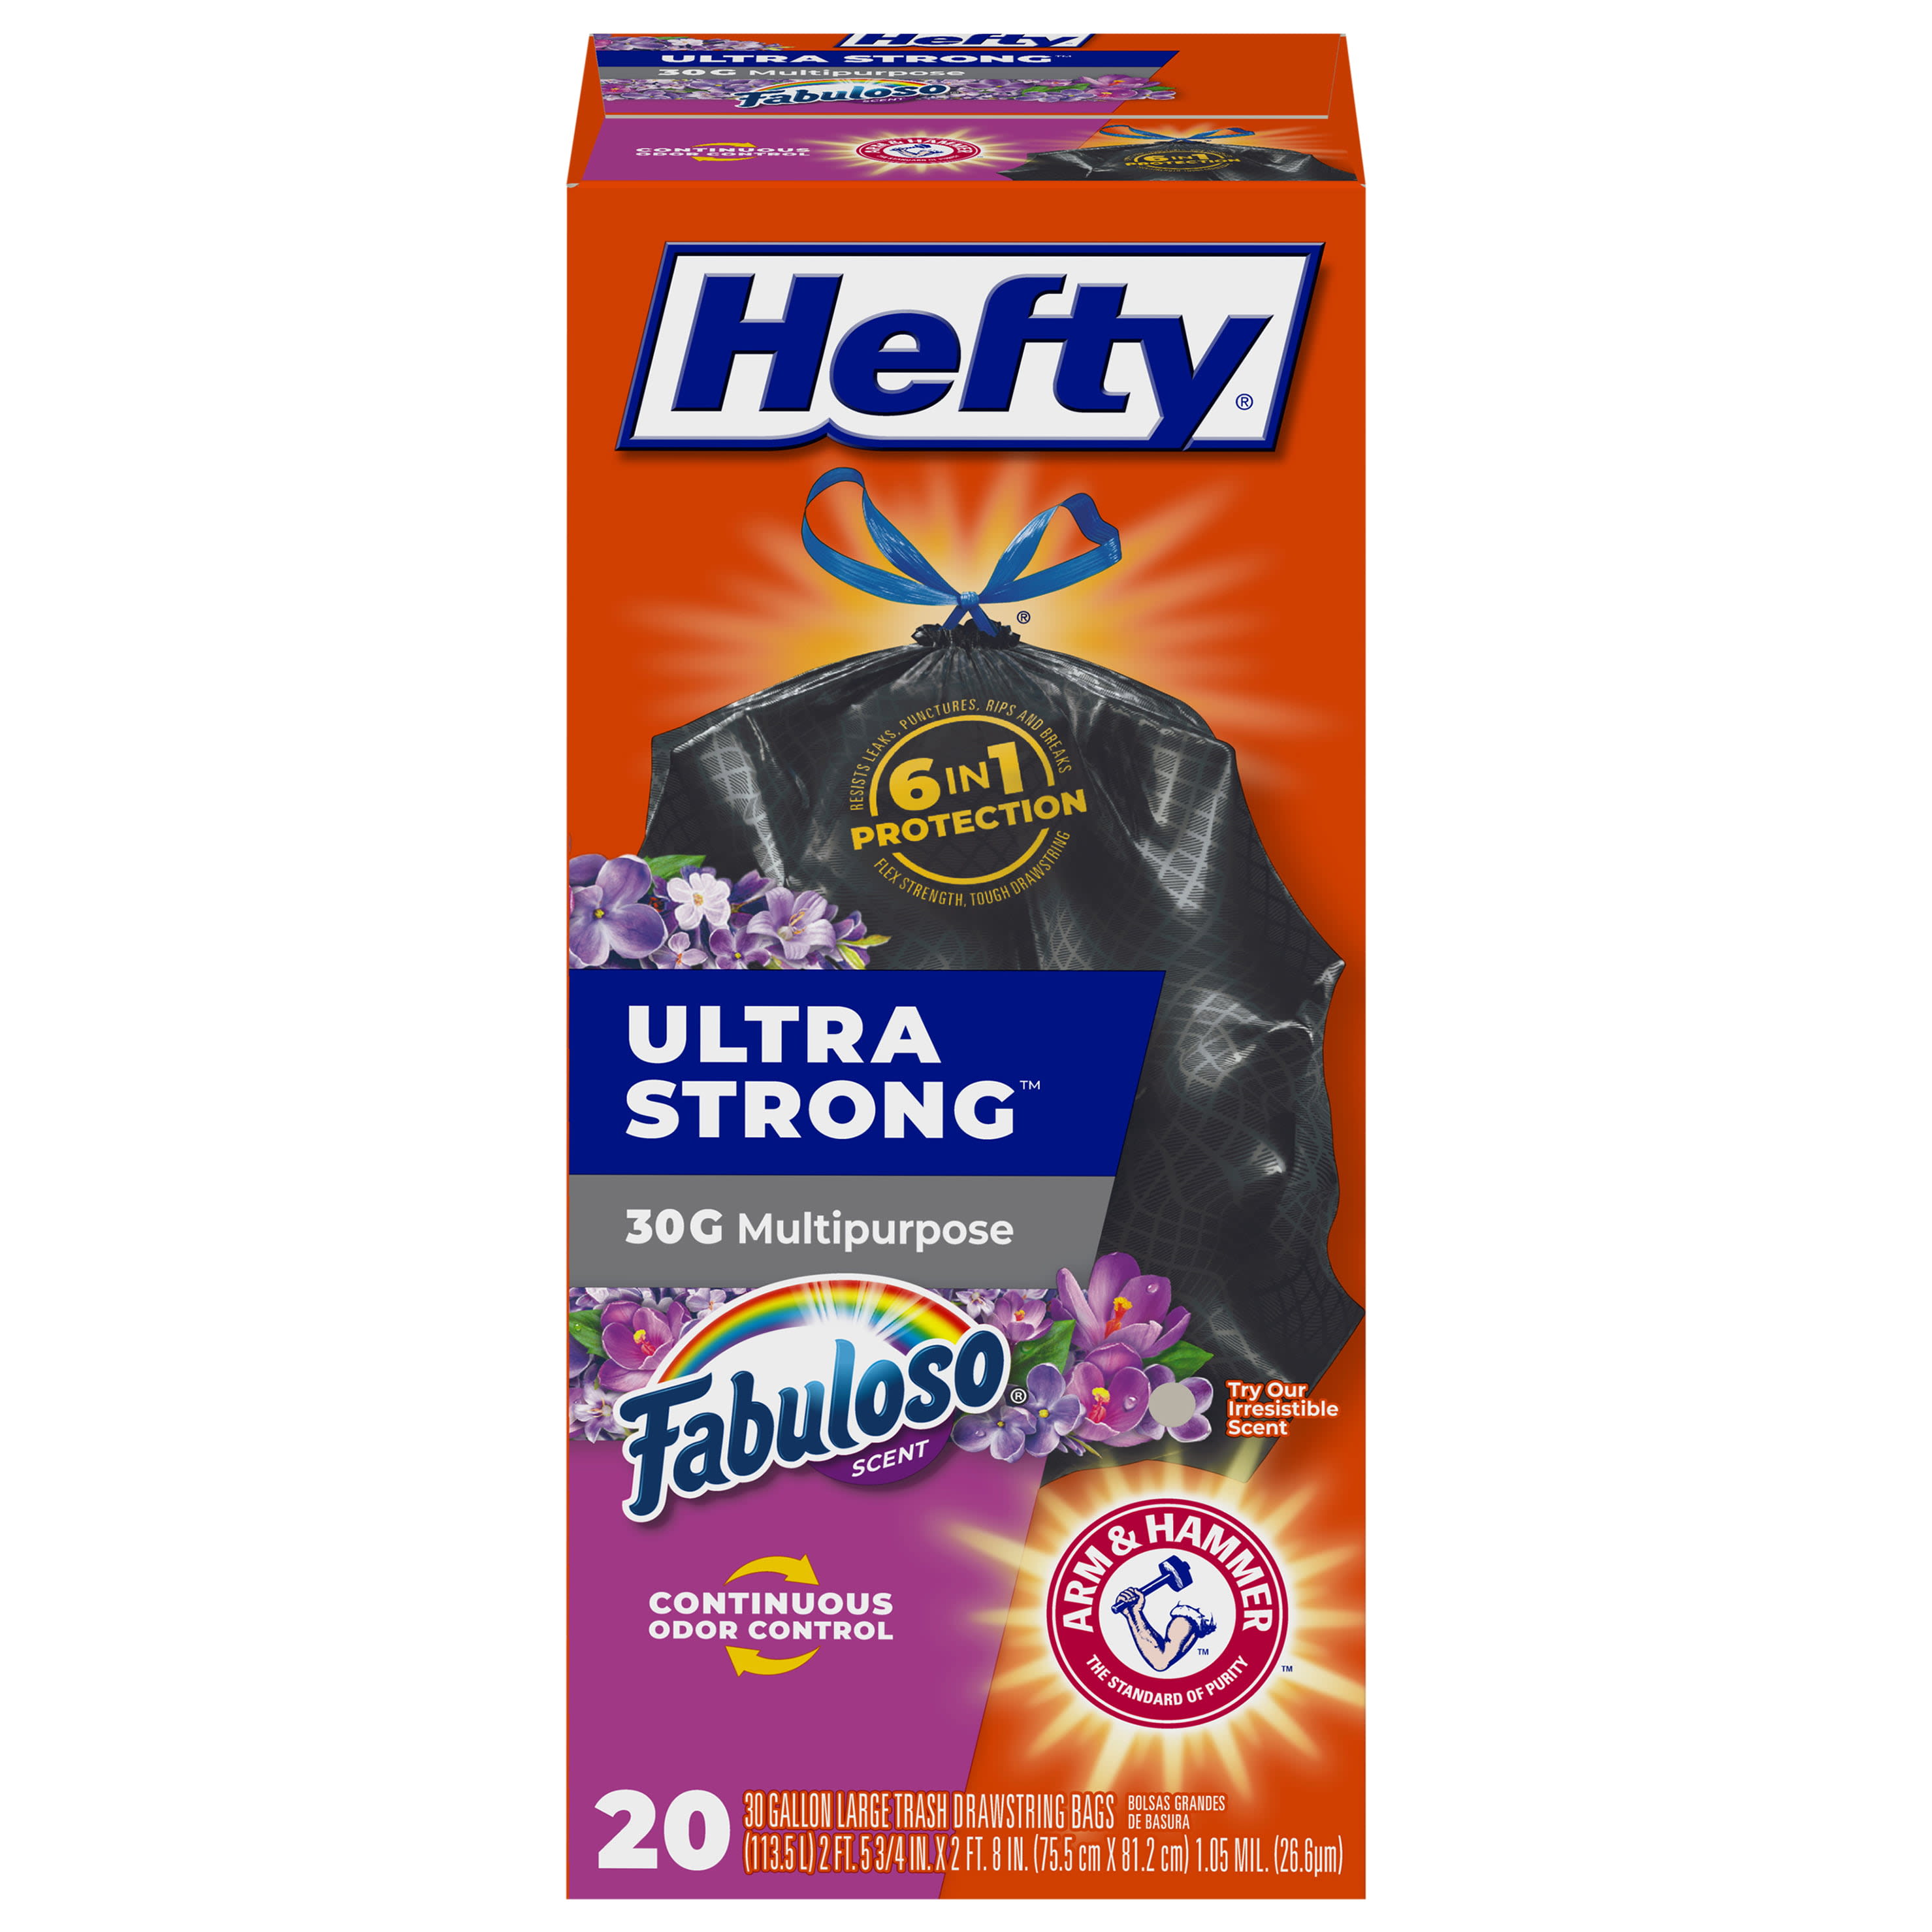 Hefty Ultra Strong Tall Kitchen Trash Bags, Fabuloso Scent, 13 Gallon, 40  Count - DroneUp Delivery